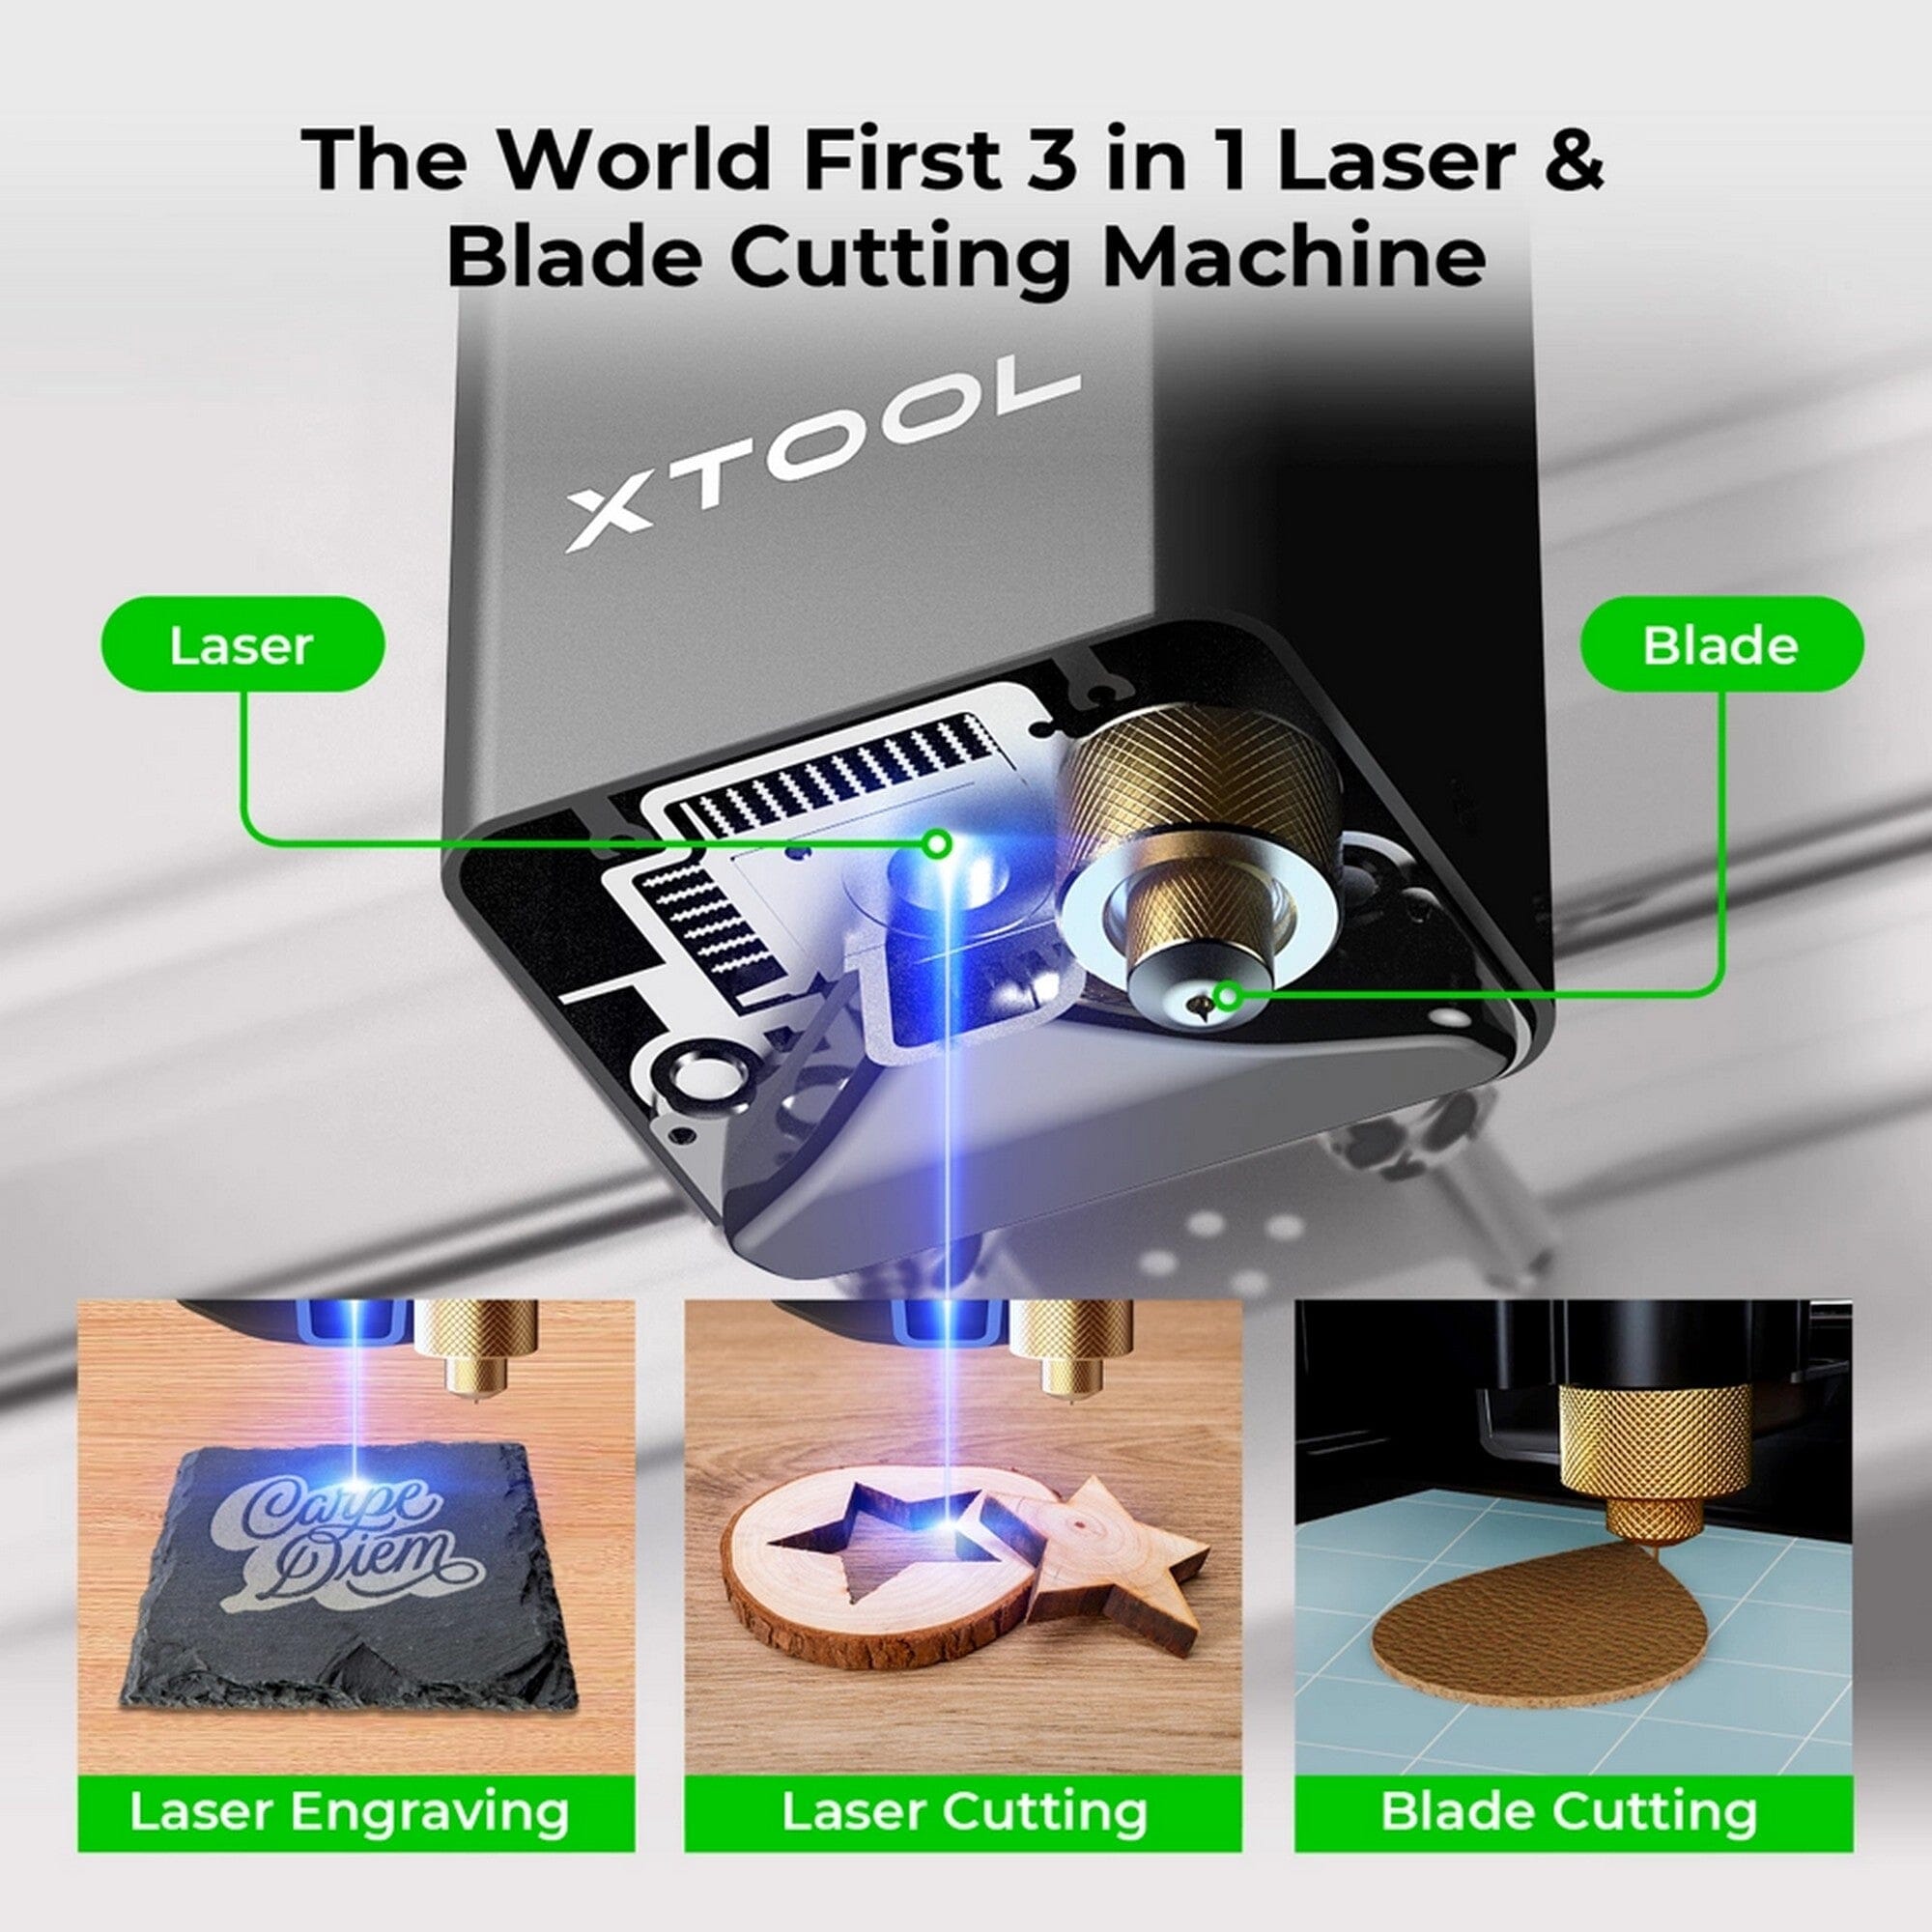 xTool D1 Pro Laser Engraving and Cutting Machine review - Shiny, red,  powerful and it has a laser! - The Gadgeteer